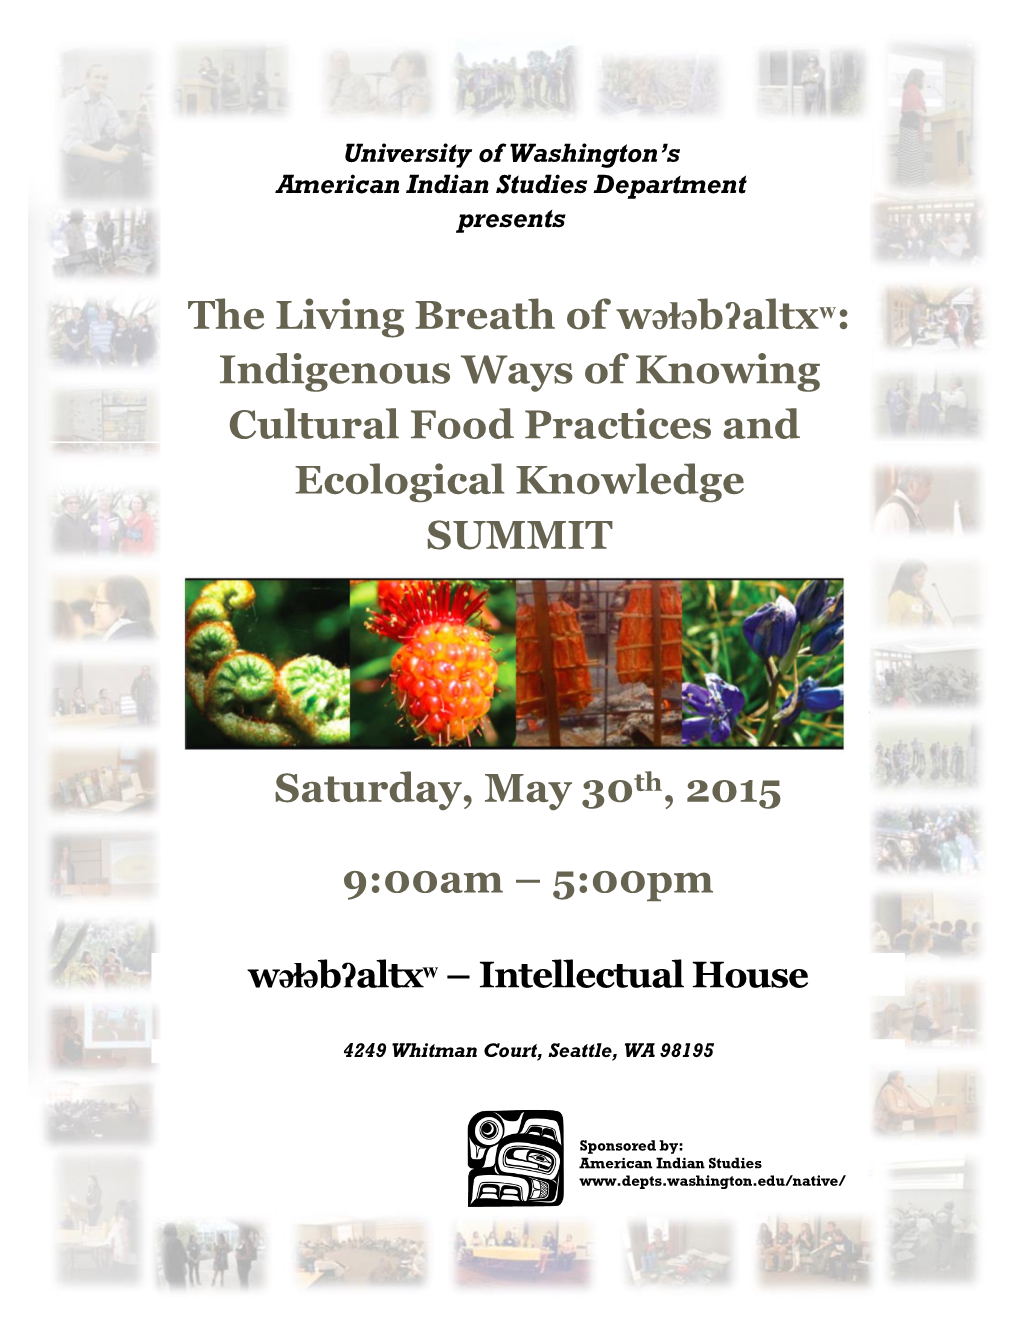 The Living Breath of Wǝɫǝbʔaltxʷ: Indigenous Ways of Knowing Cultural Food Practices and Ecological Knowledge SUMMIT